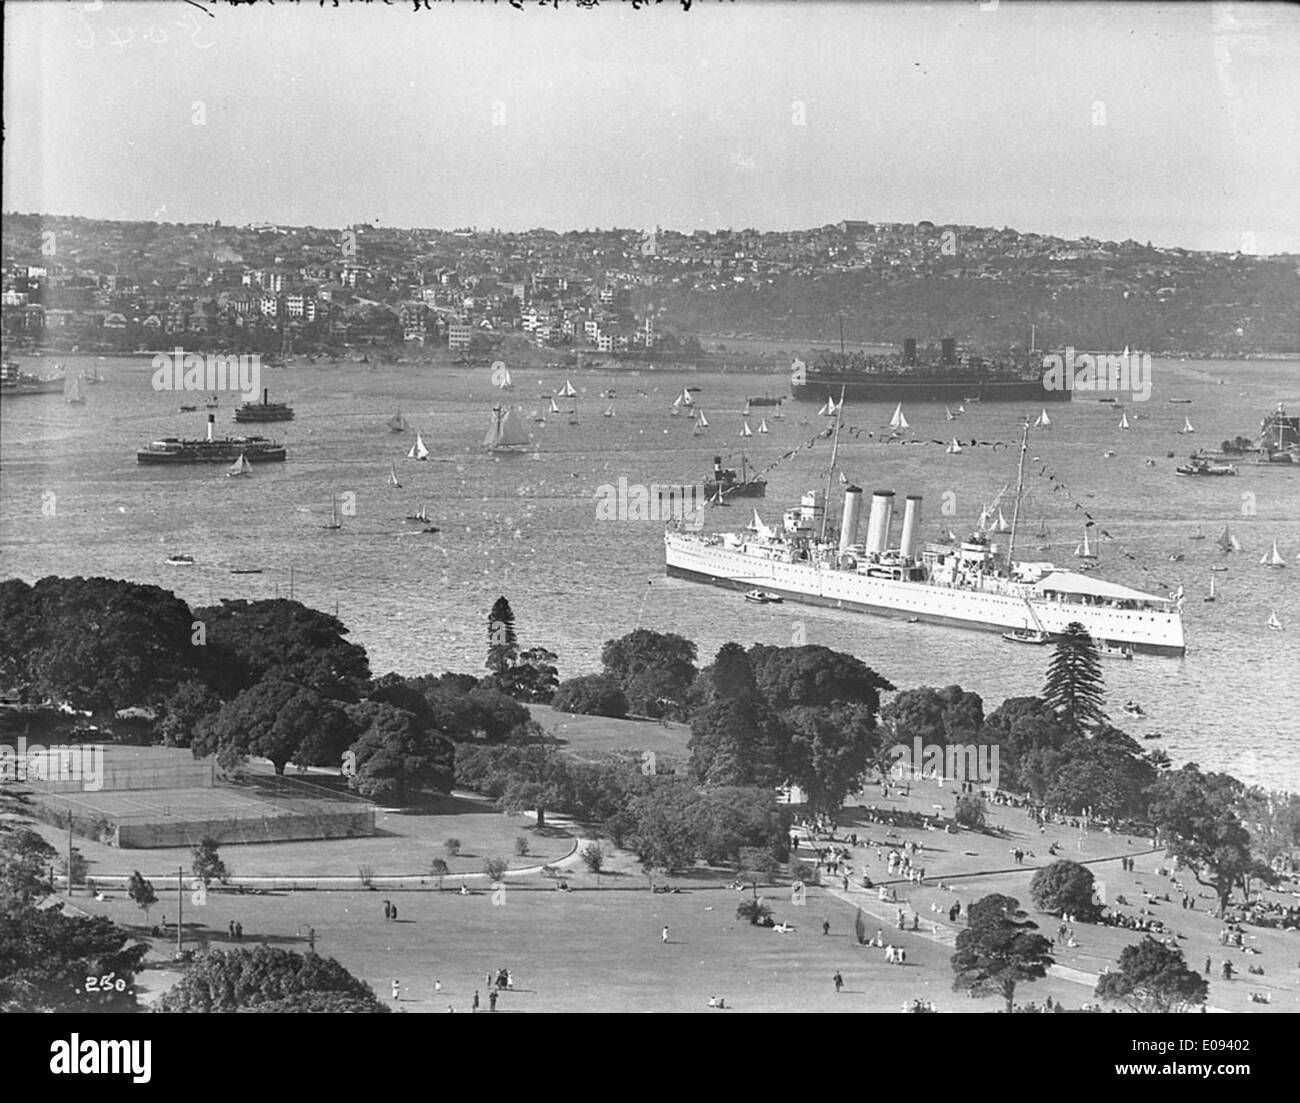 Sydney Harbour, 19 March 1932, by Hall & Co. Stock Photo